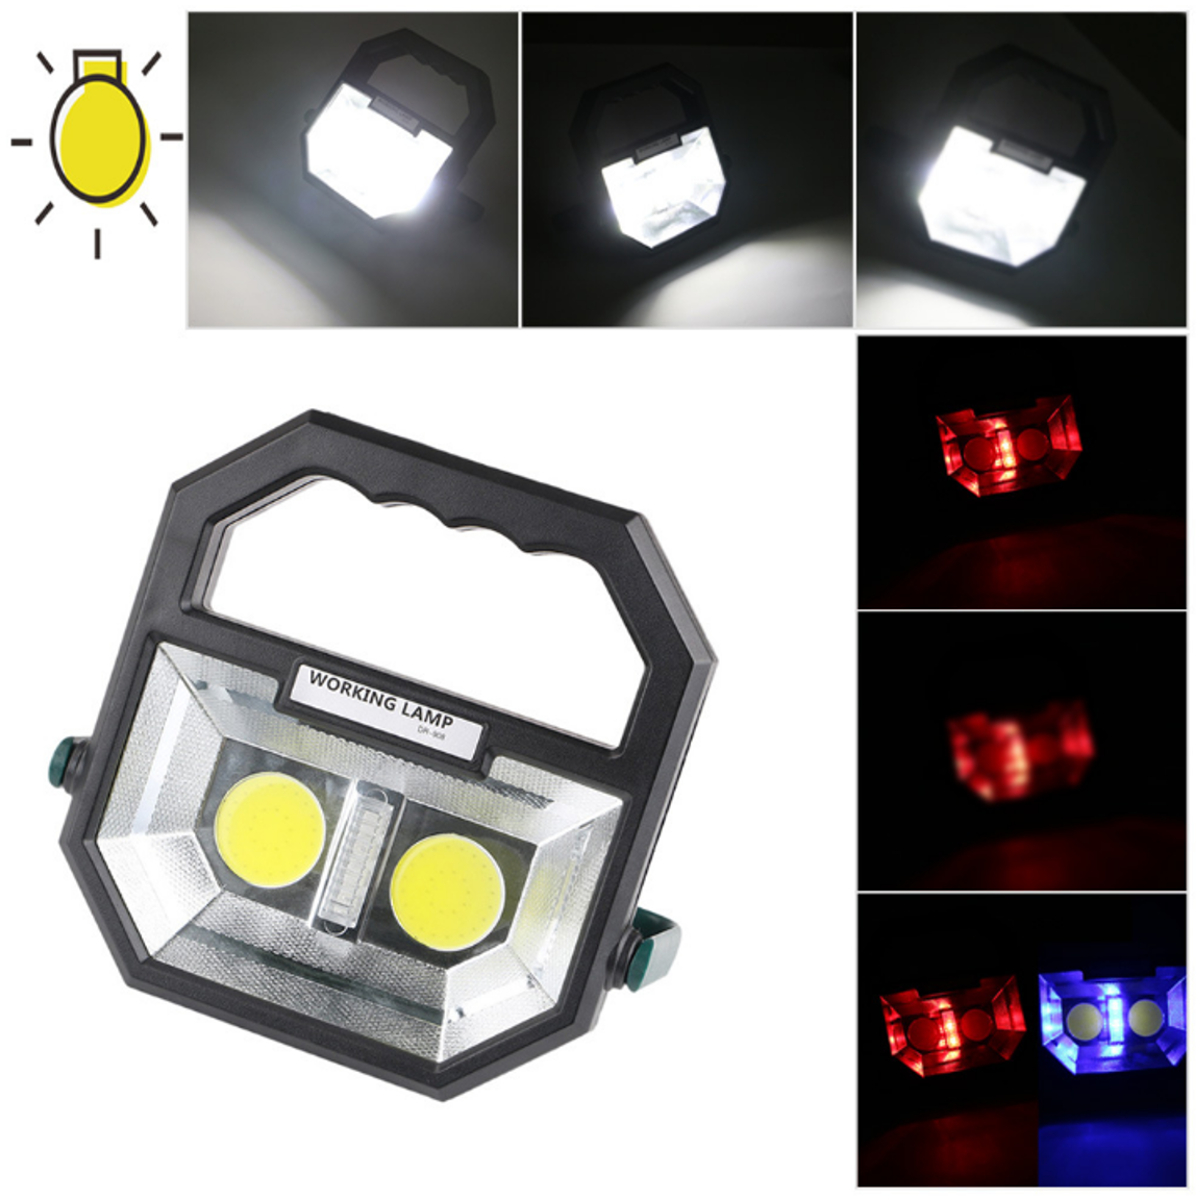 10W-300LM-COB-LED-USB-Rechargeable-Flood-Work-Light-Spot-Lamp-Outdoor-Camping-Tent-Lantern-1406464-1